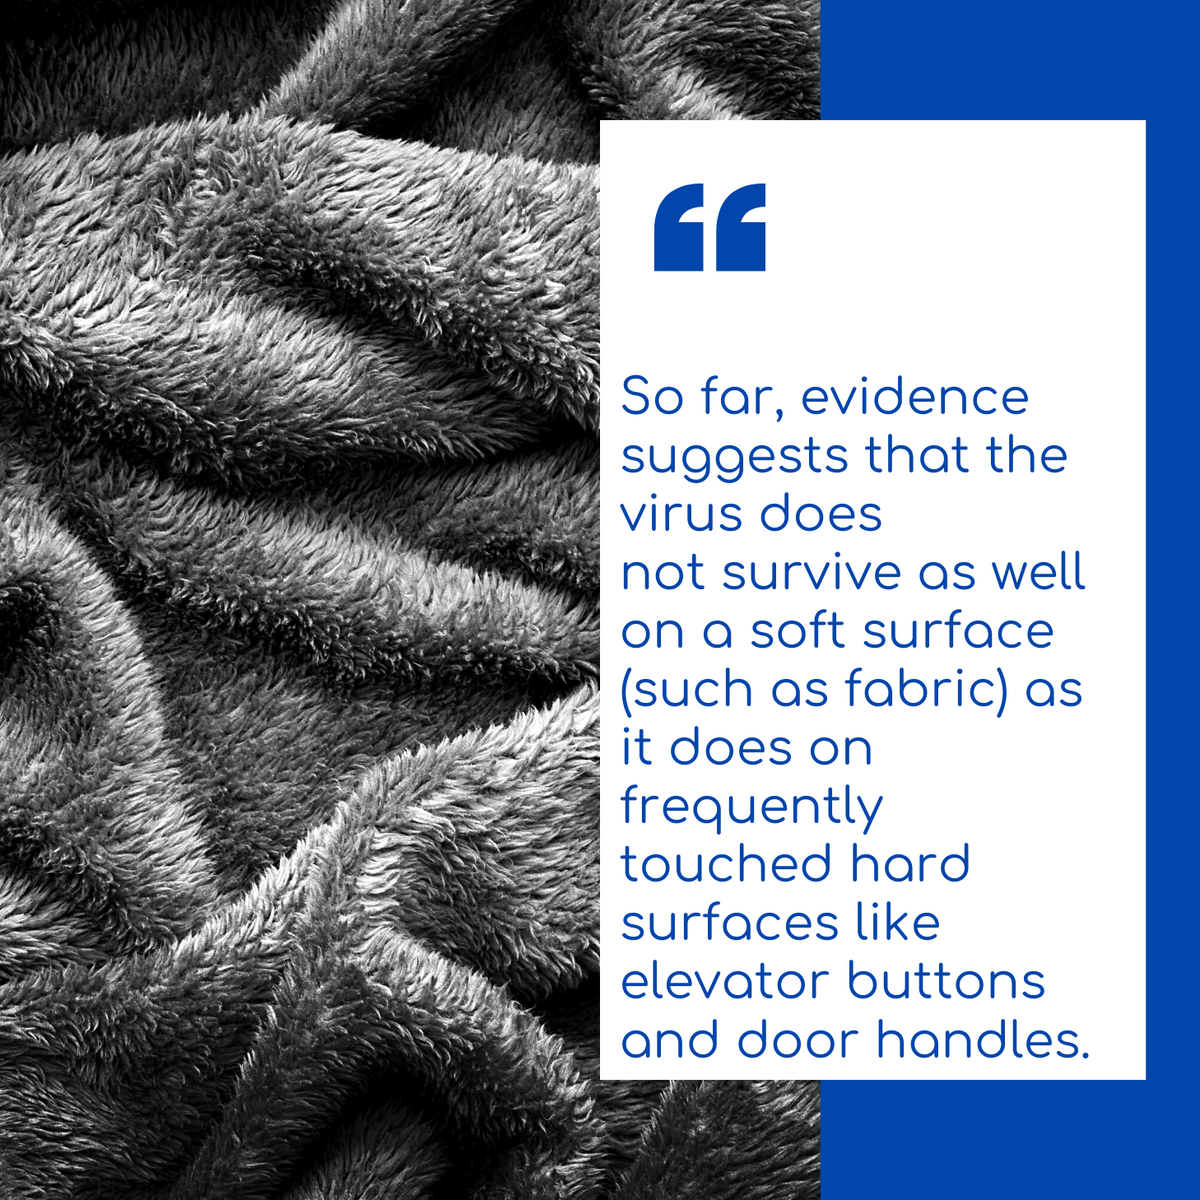 “So far, evidence suggests that the virus does not survive as well on a soft surface (such as fabric) as it does on frequently touched hard surfaces like elevator buttons and door handles.”